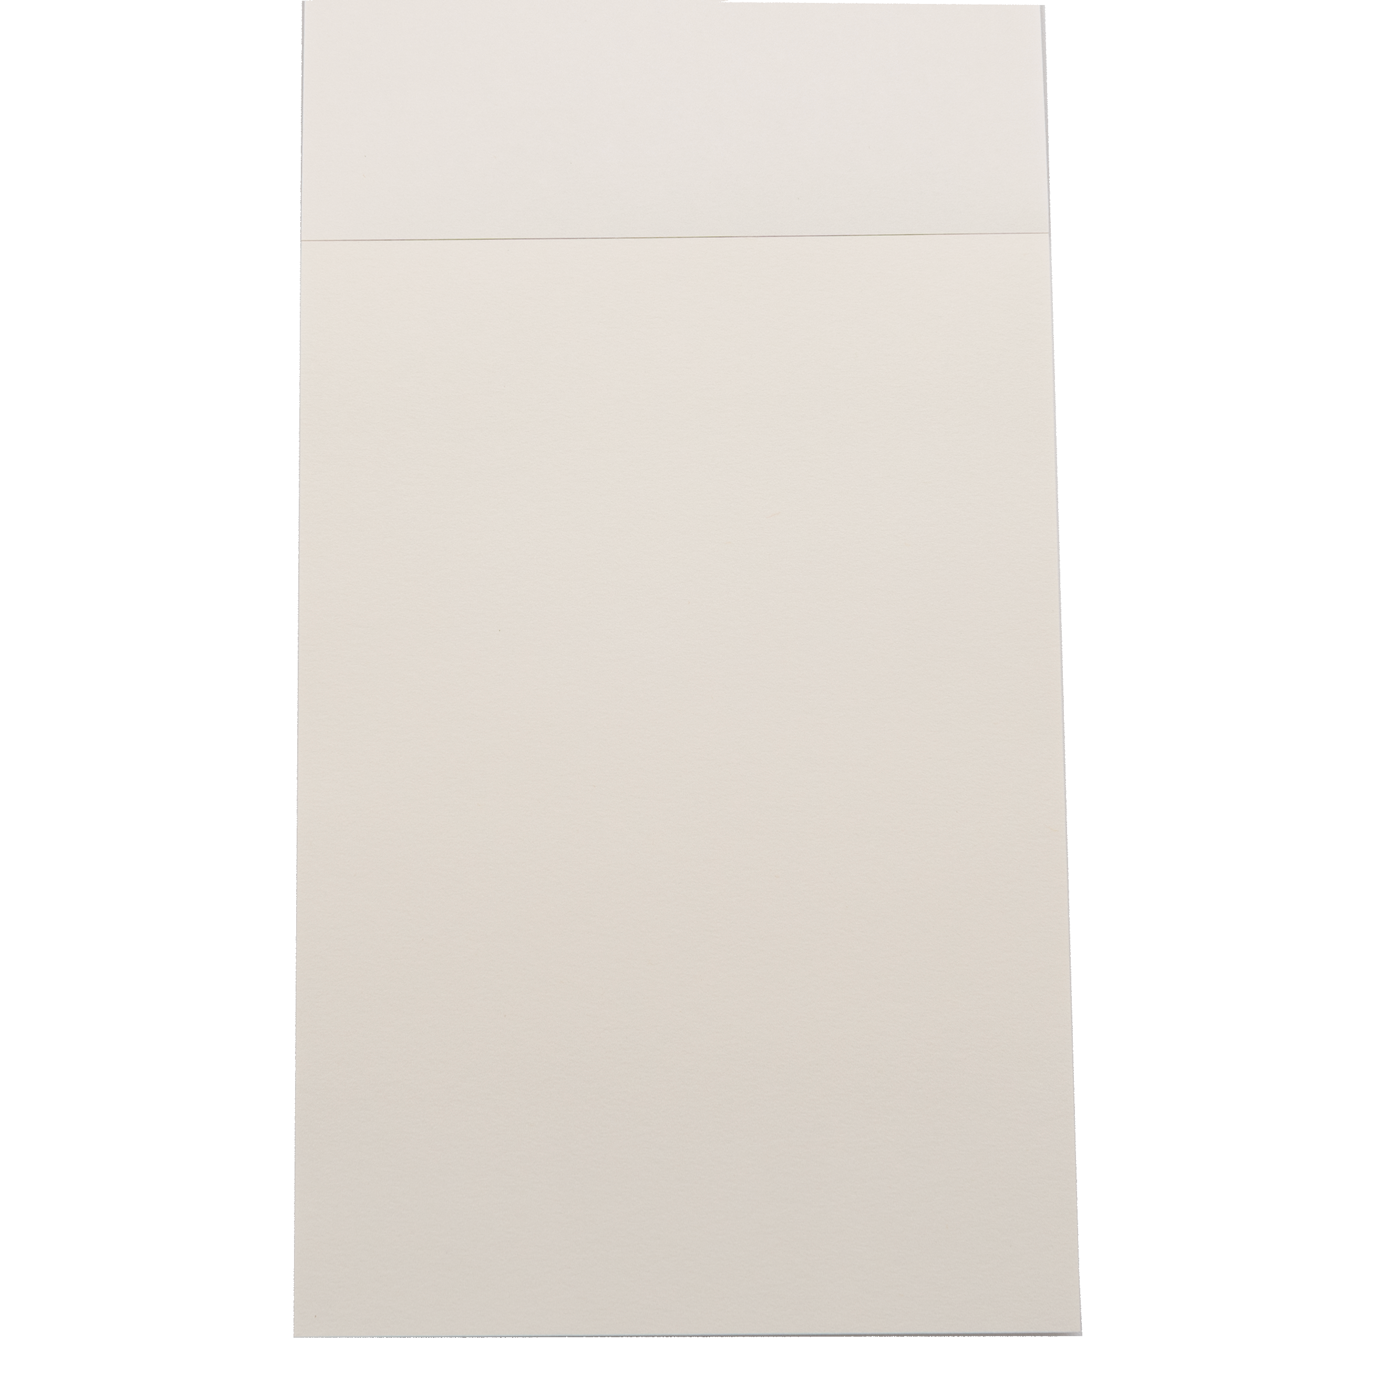 Wearingeul Nobile No.1 Paper Pad A5 Blank